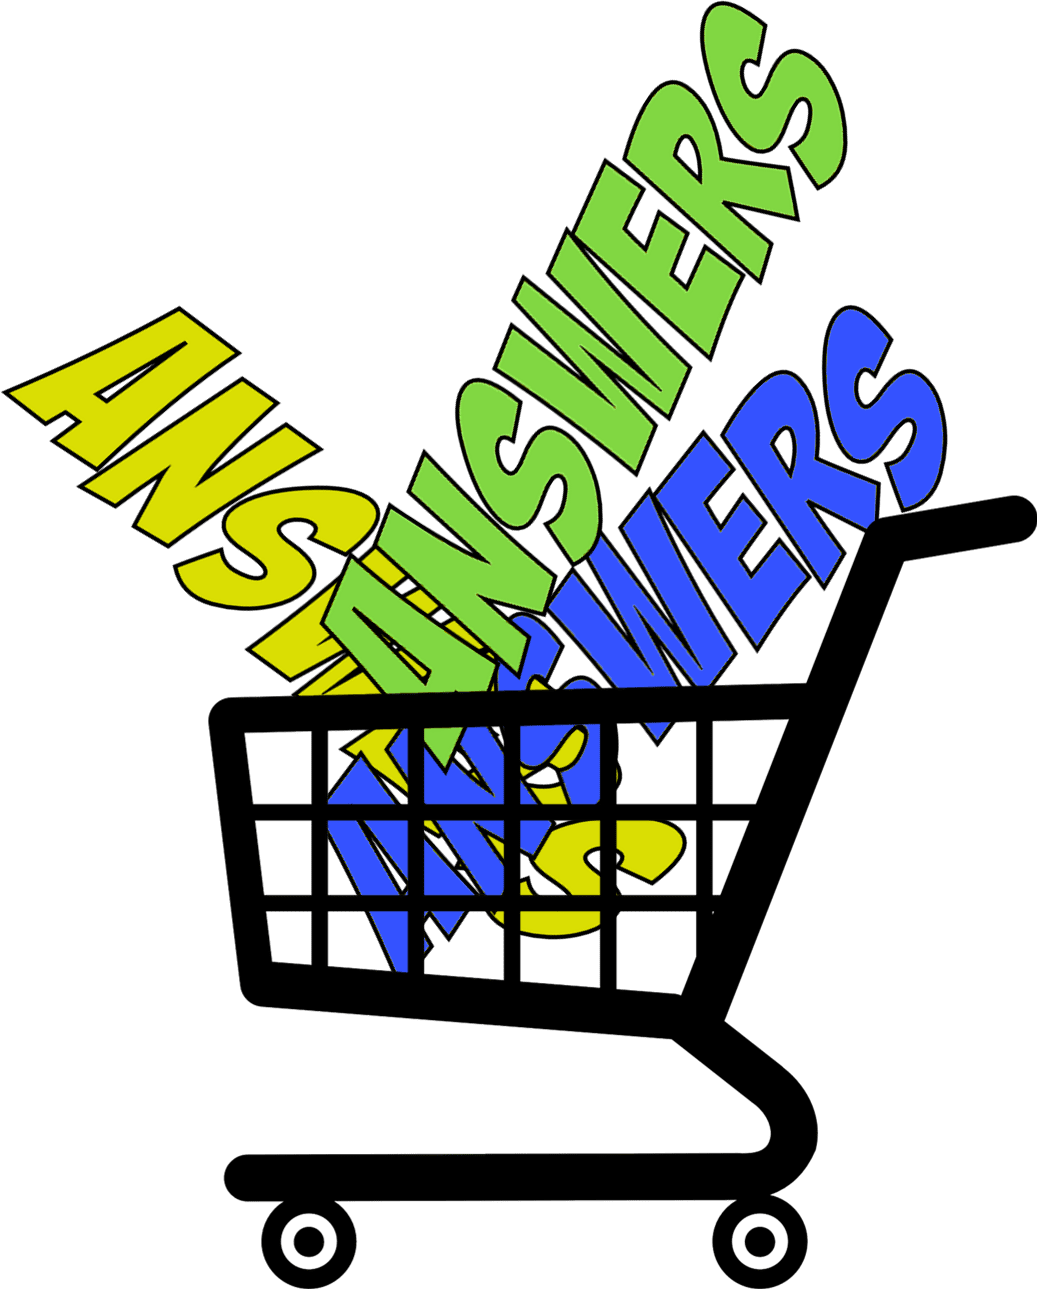 Shopping cart filled with the word “answers” in the 3 PressHero colours